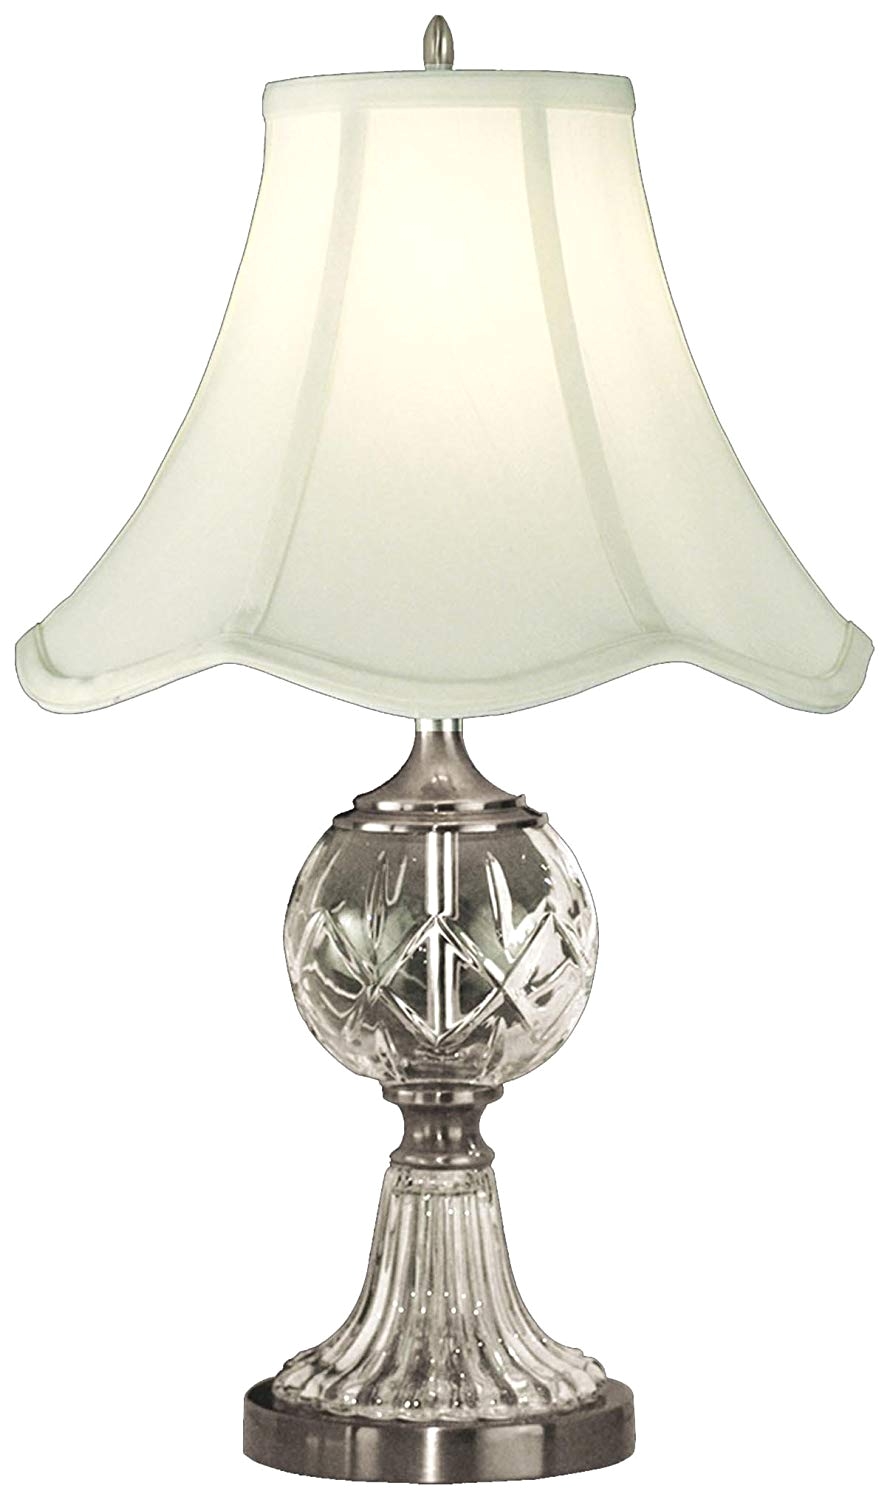 dale tiffany gt10356 crystal table lamp pewter and fabric shade glass crystal table lamps amazon com